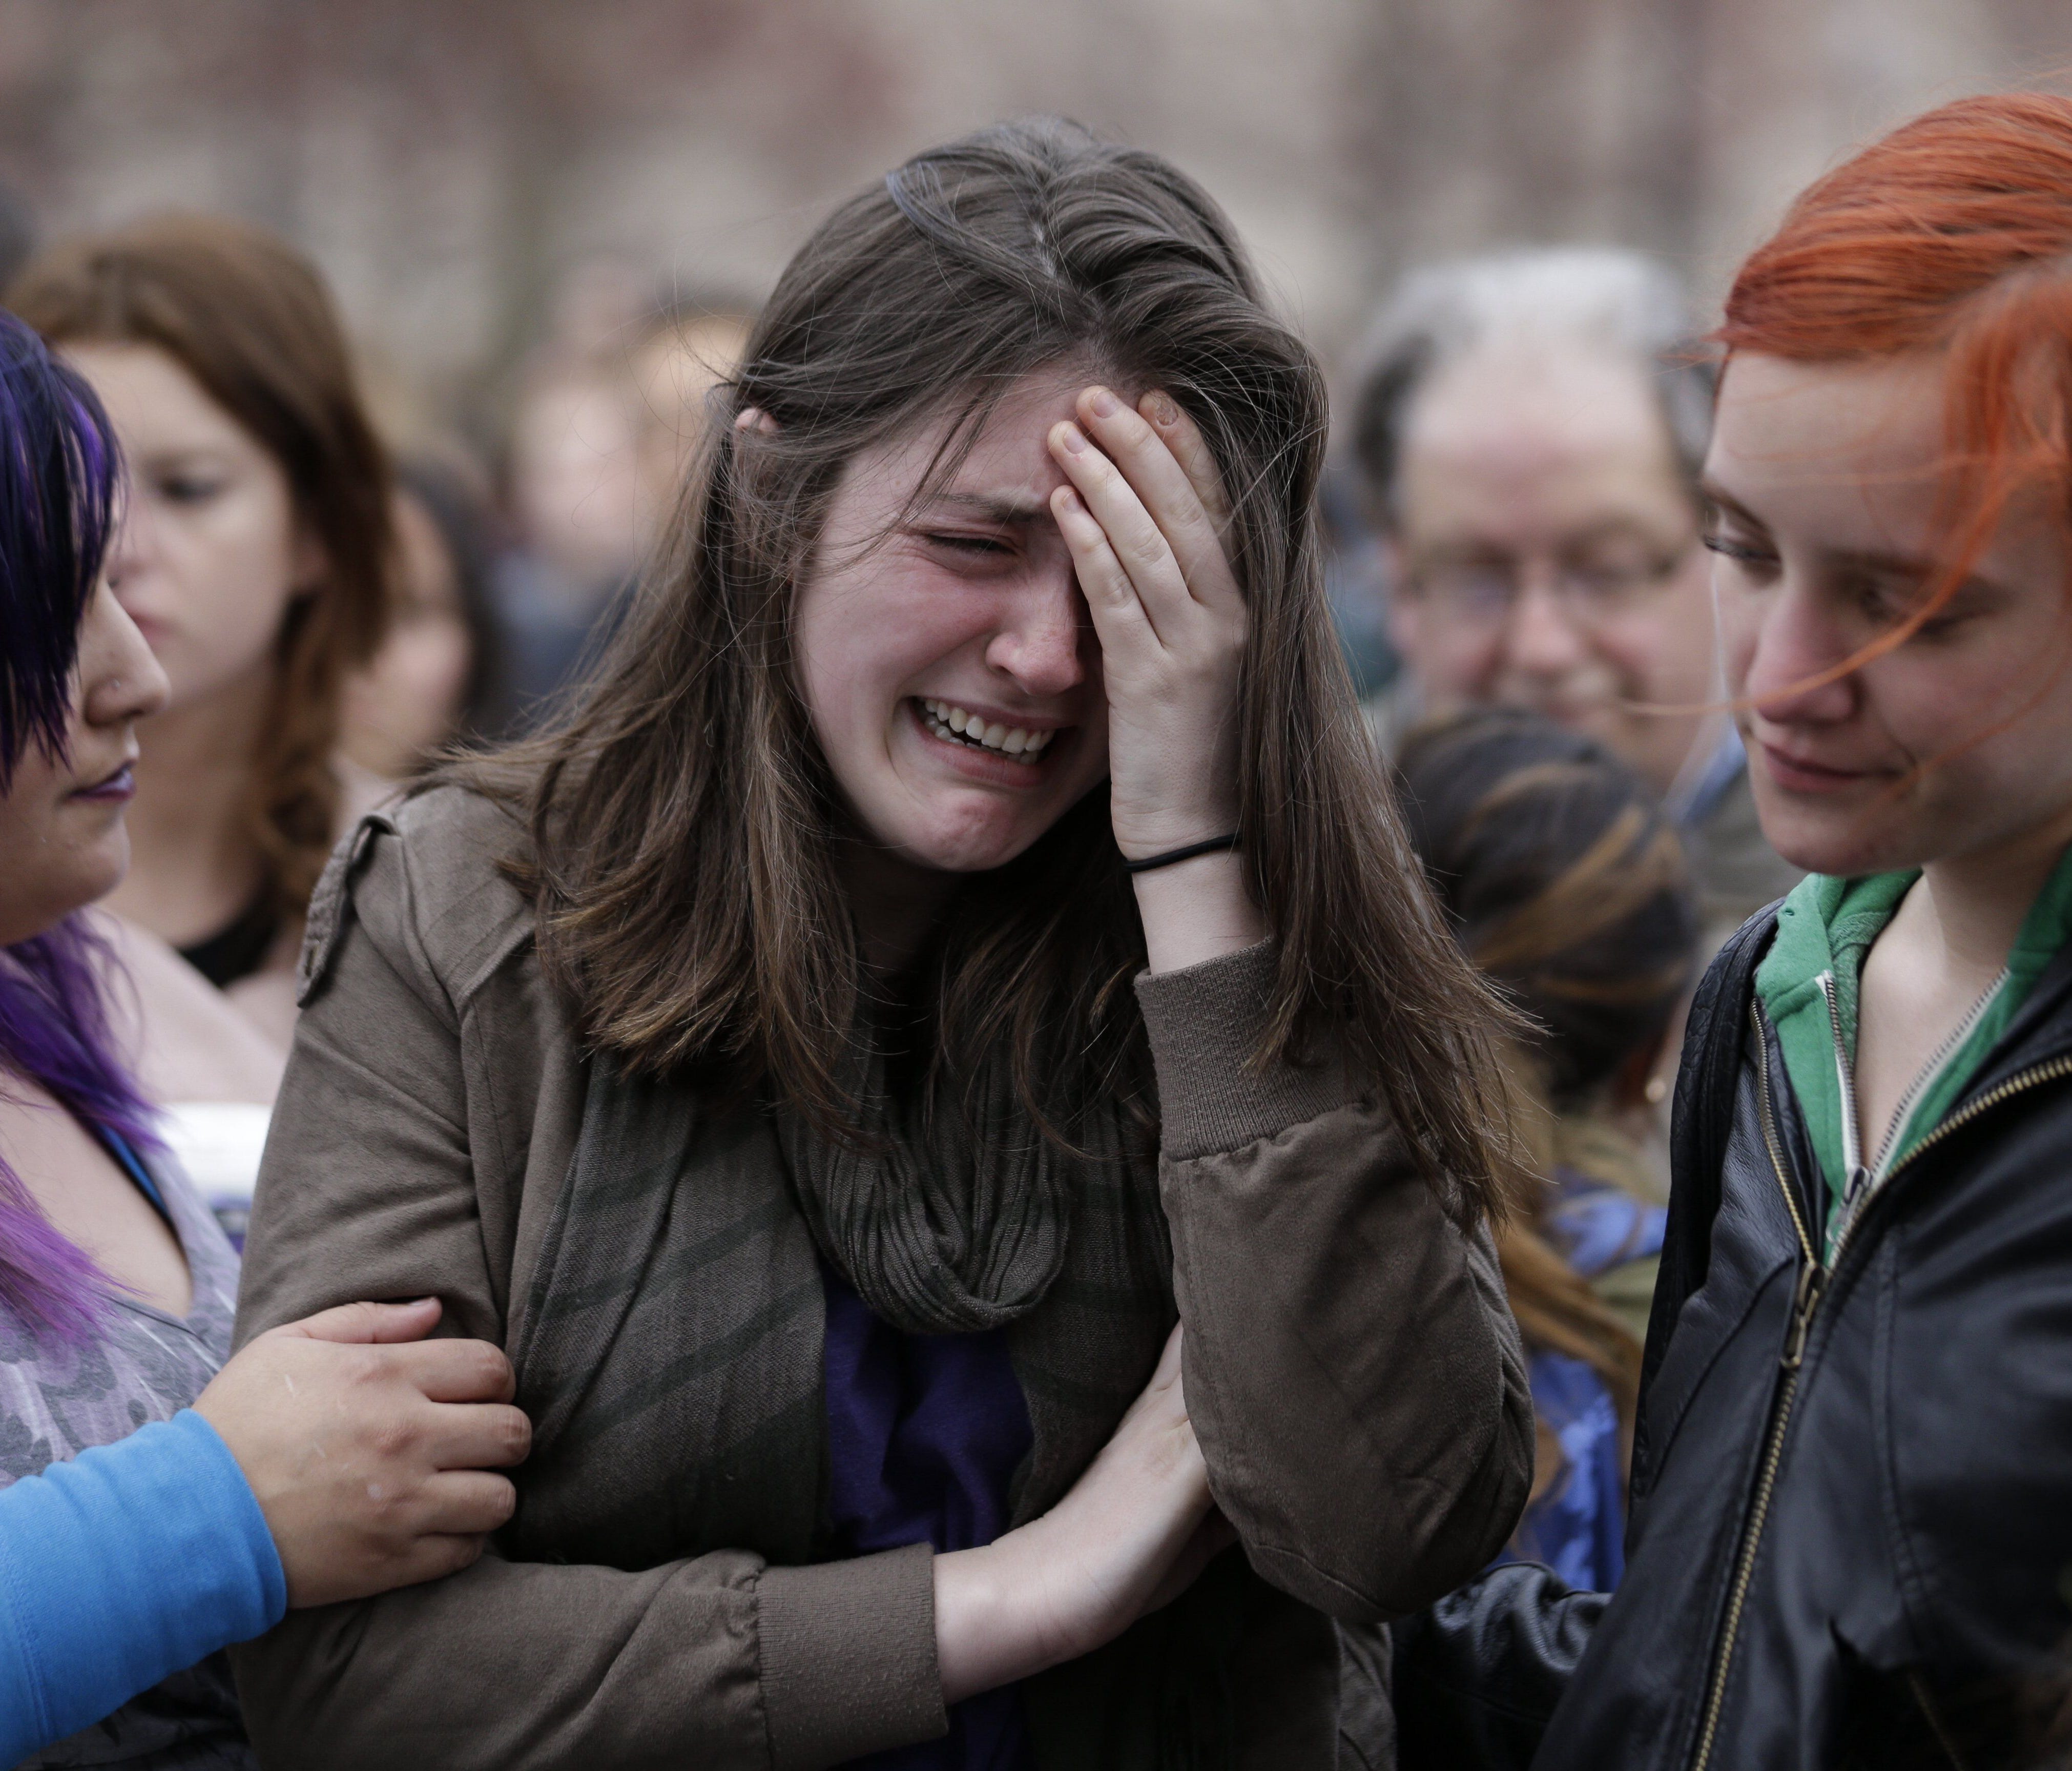 Emma MacDonald, 21, center, cries during a vigil for the victims of the Boston Marathon explosions at Boston Common, Tuesday, April 16, 2013.